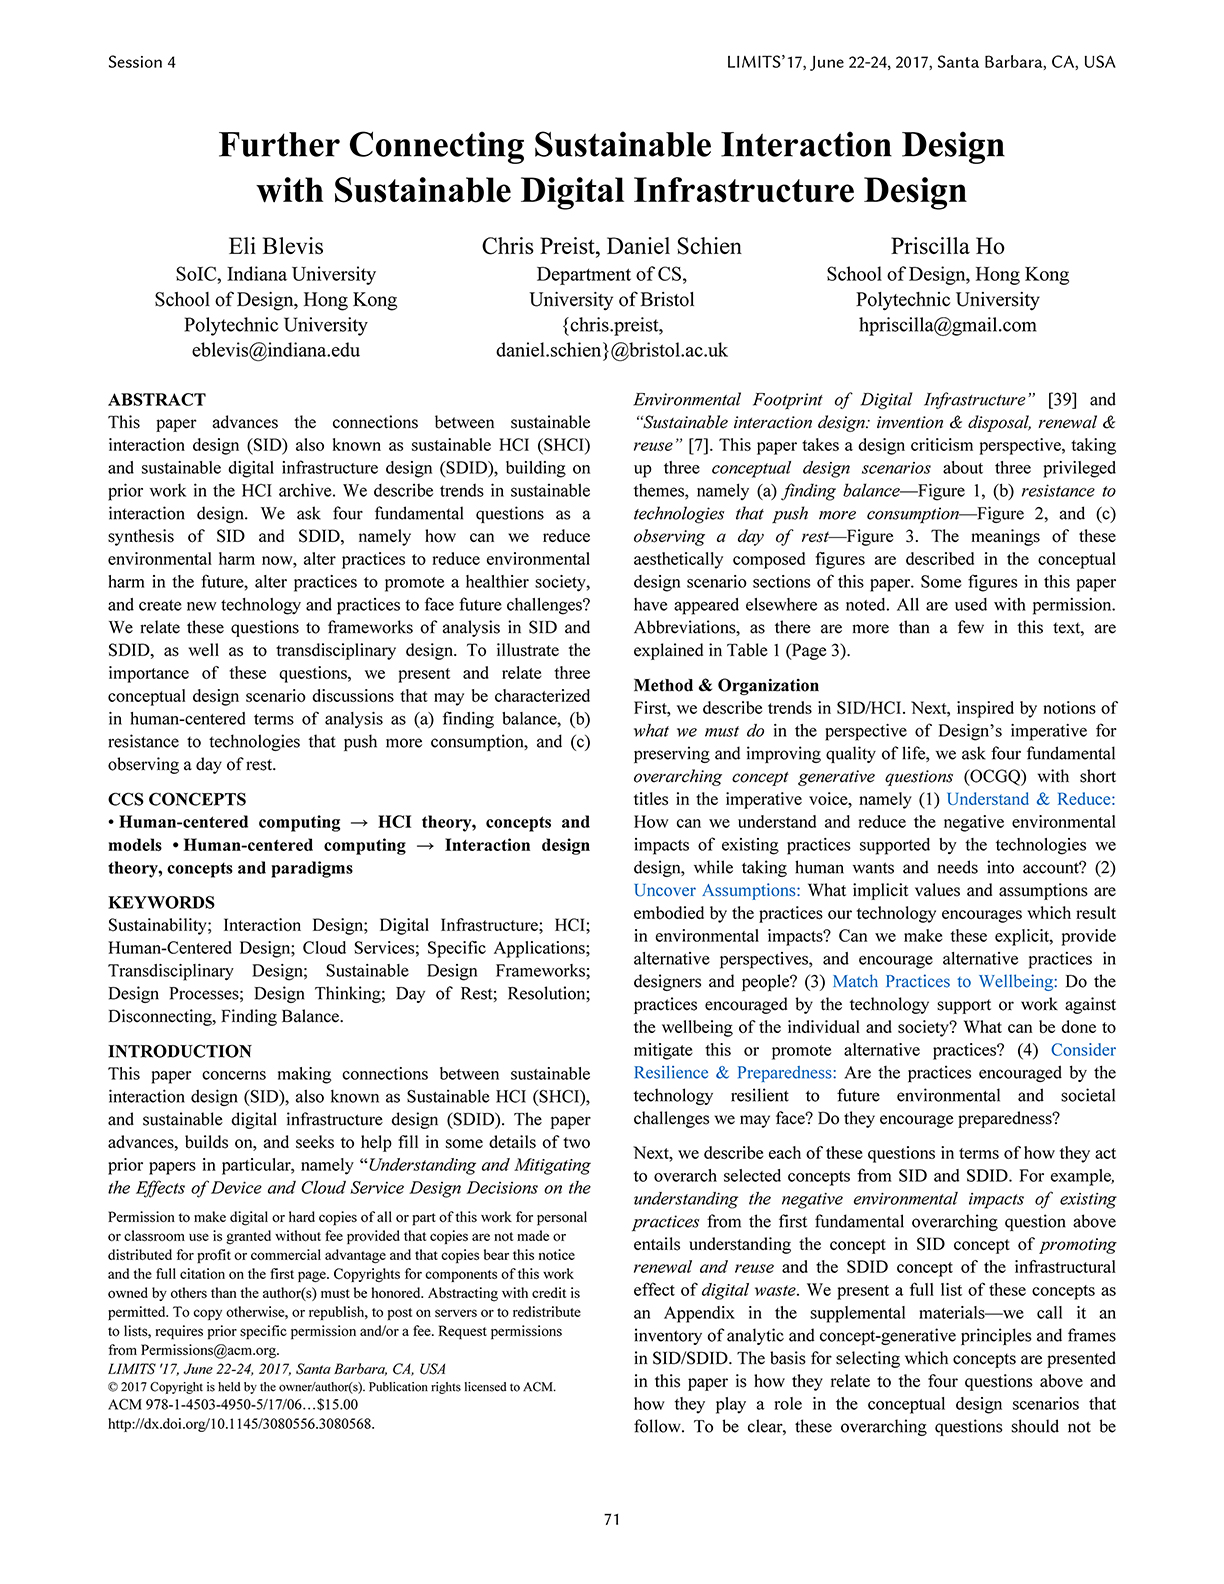 Further Connecting Sustainable Interaction Design
with Sustainable Digital Infrastructure Design